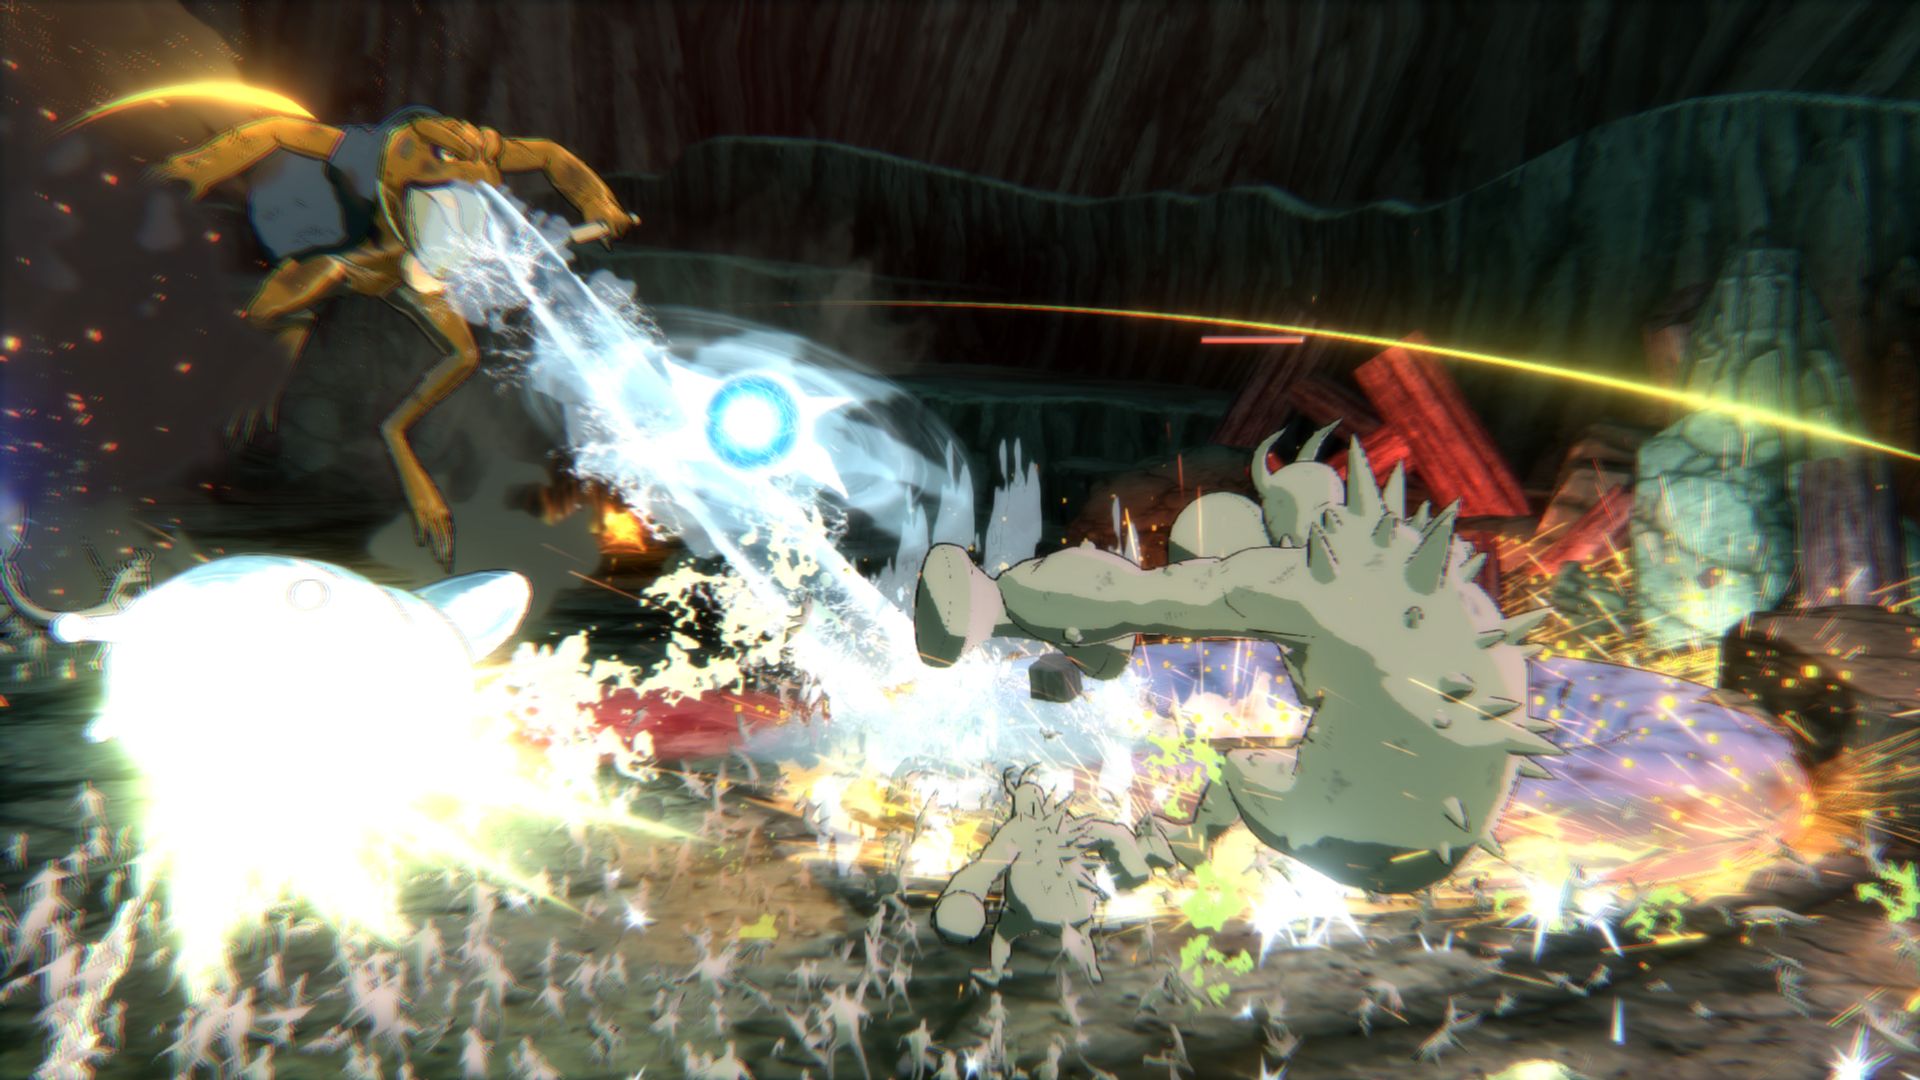 Naruto Shippuden: Ultimate Ninja Storm 4 will come in Q3 of 2015